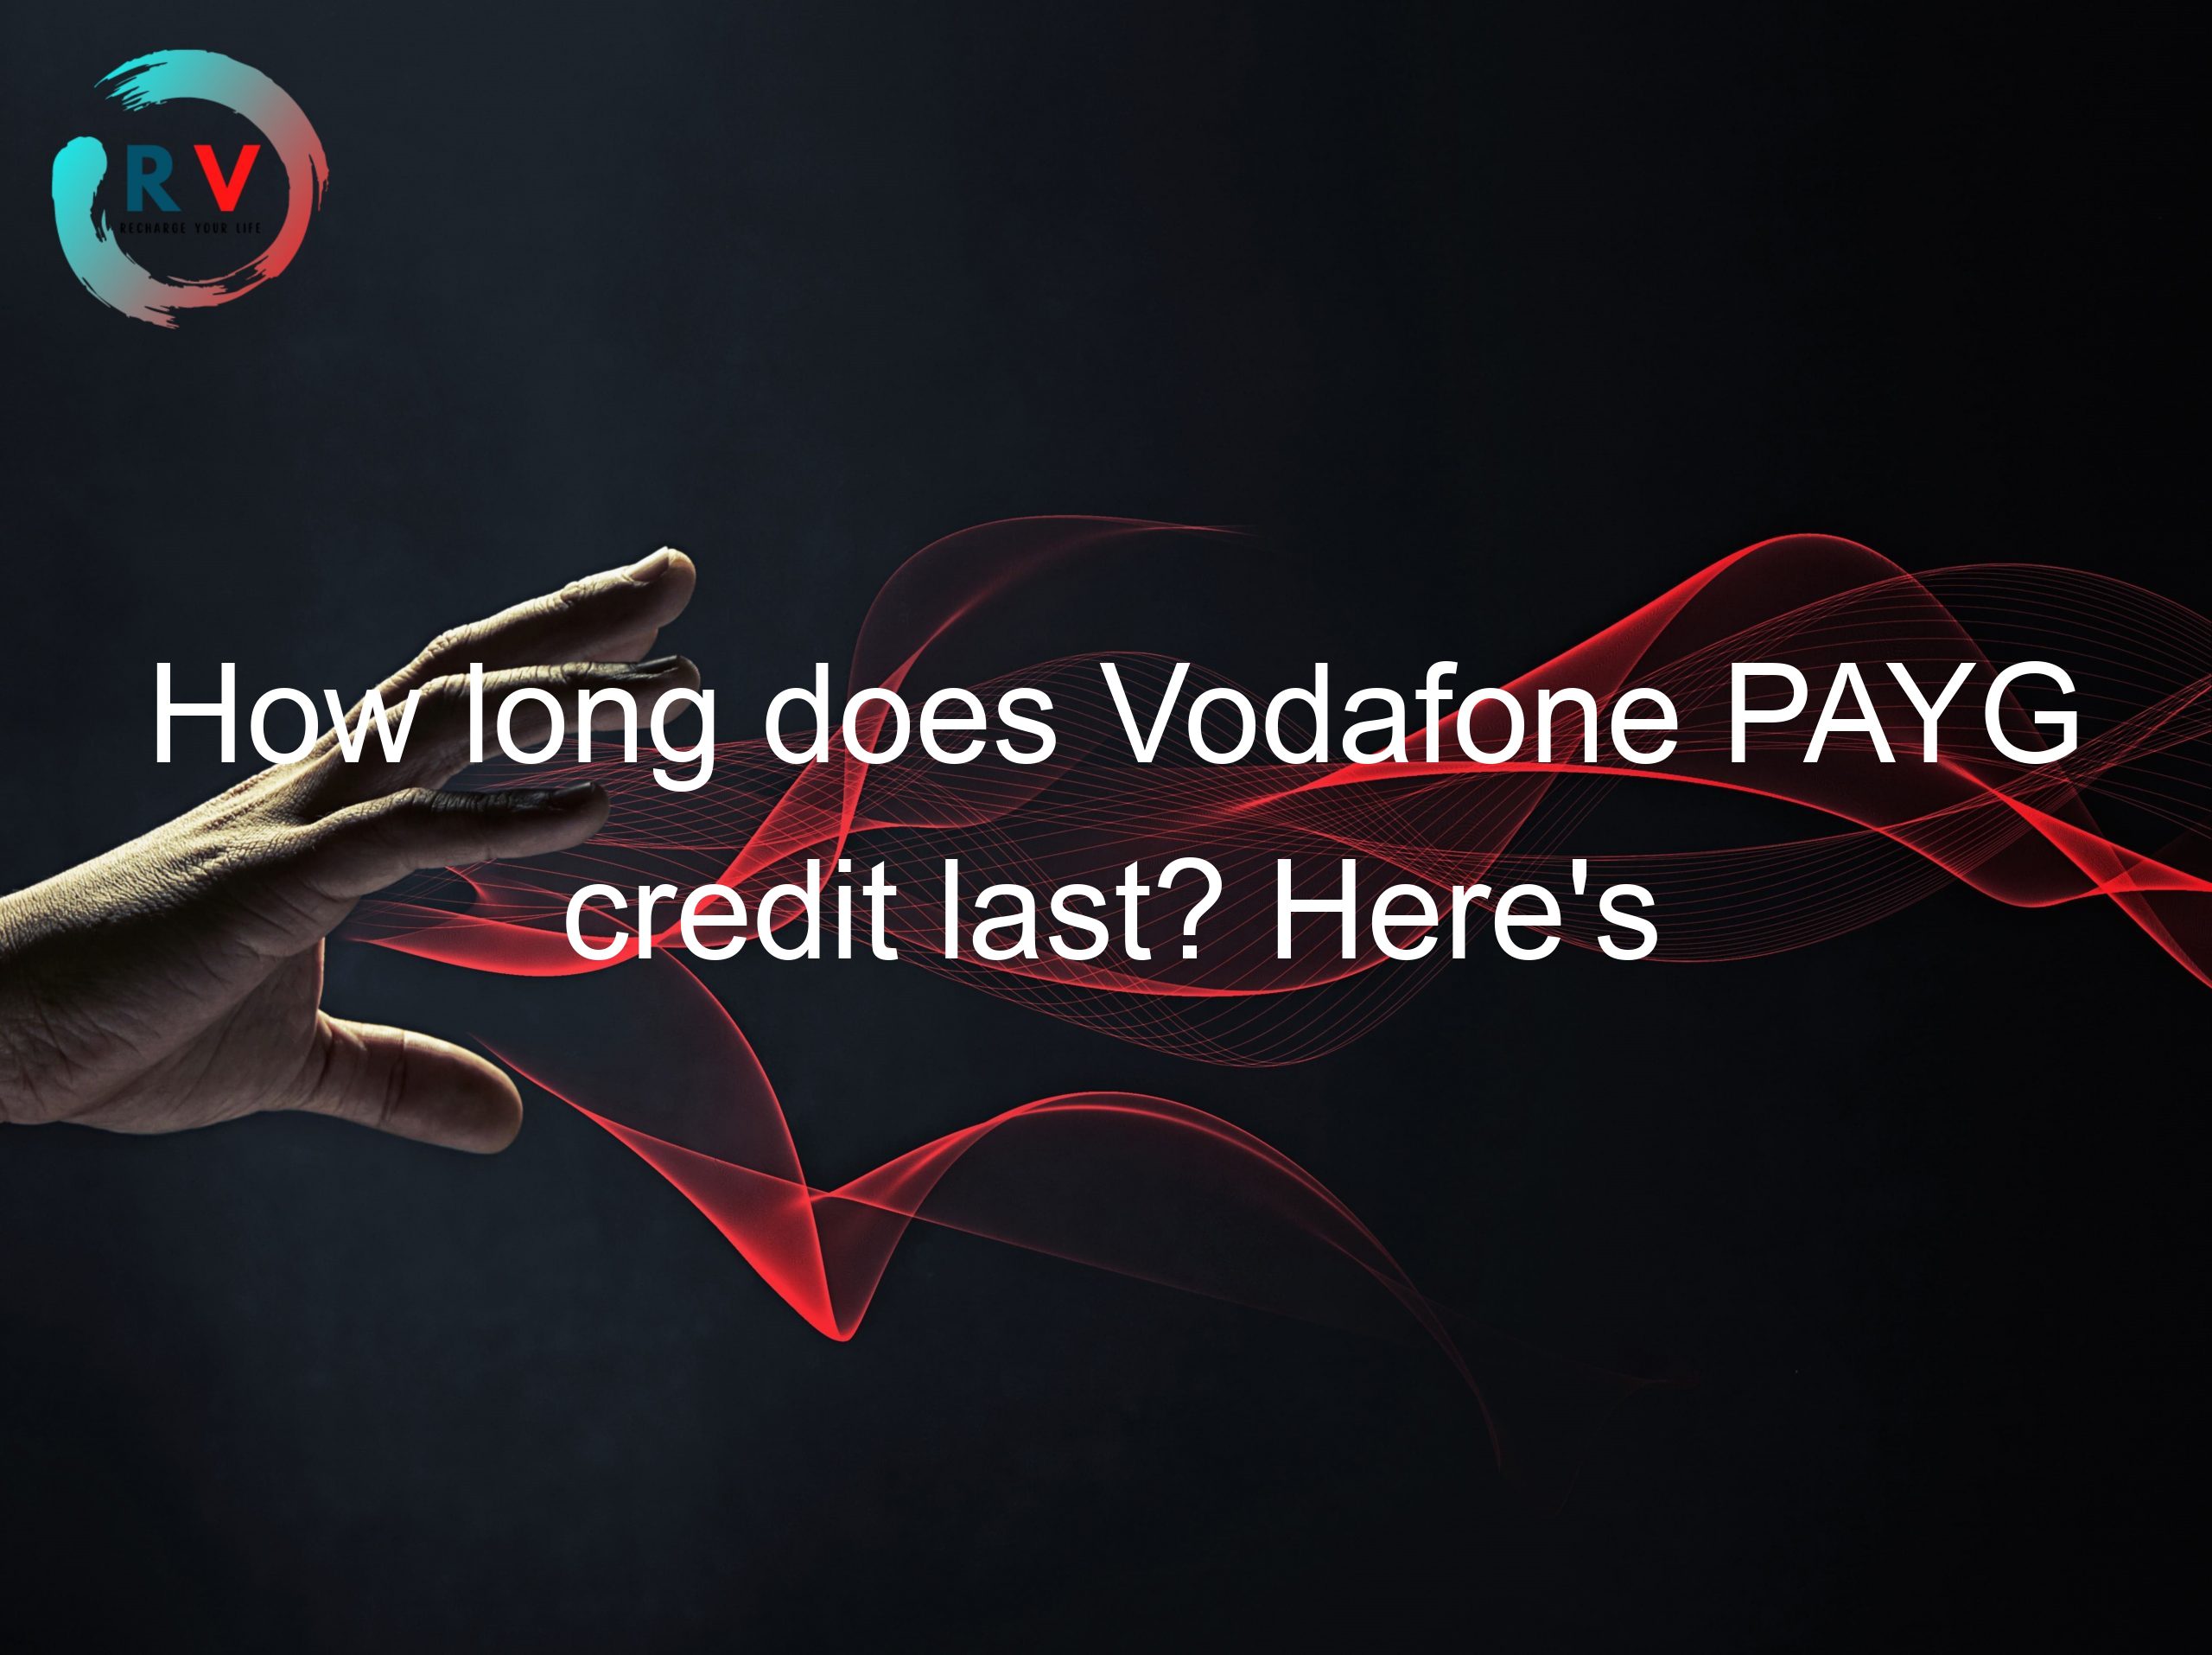 How long does Vodafone PAYG credit last? Here's what you need to know!